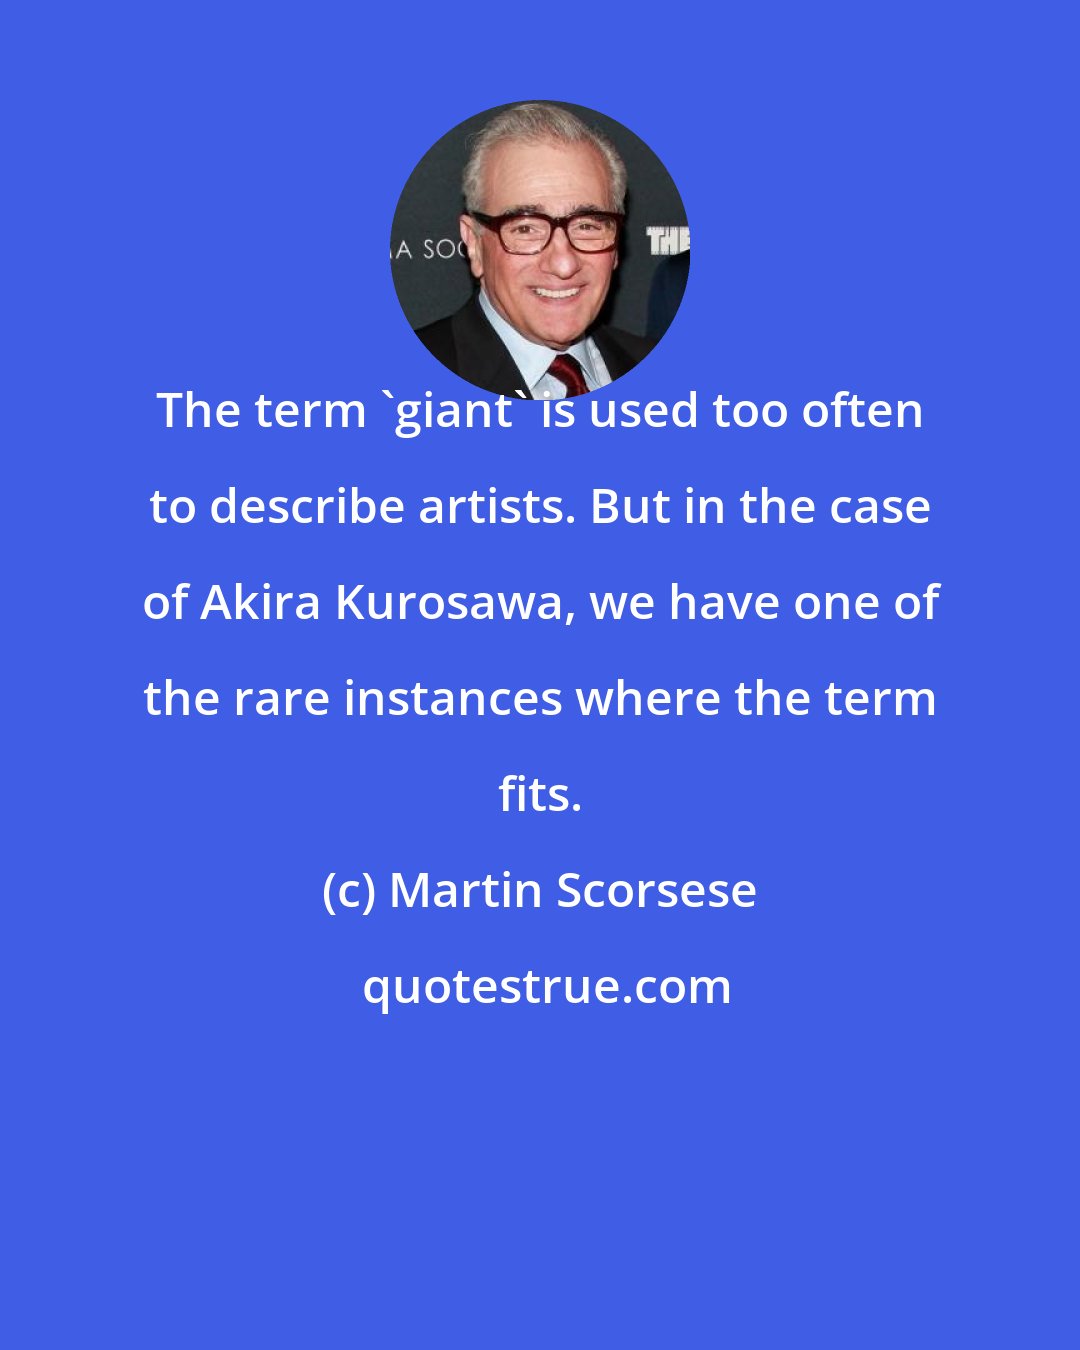 Martin Scorsese: The term 'giant' is used too often to describe artists. But in the case of Akira Kurosawa, we have one of the rare instances where the term fits.